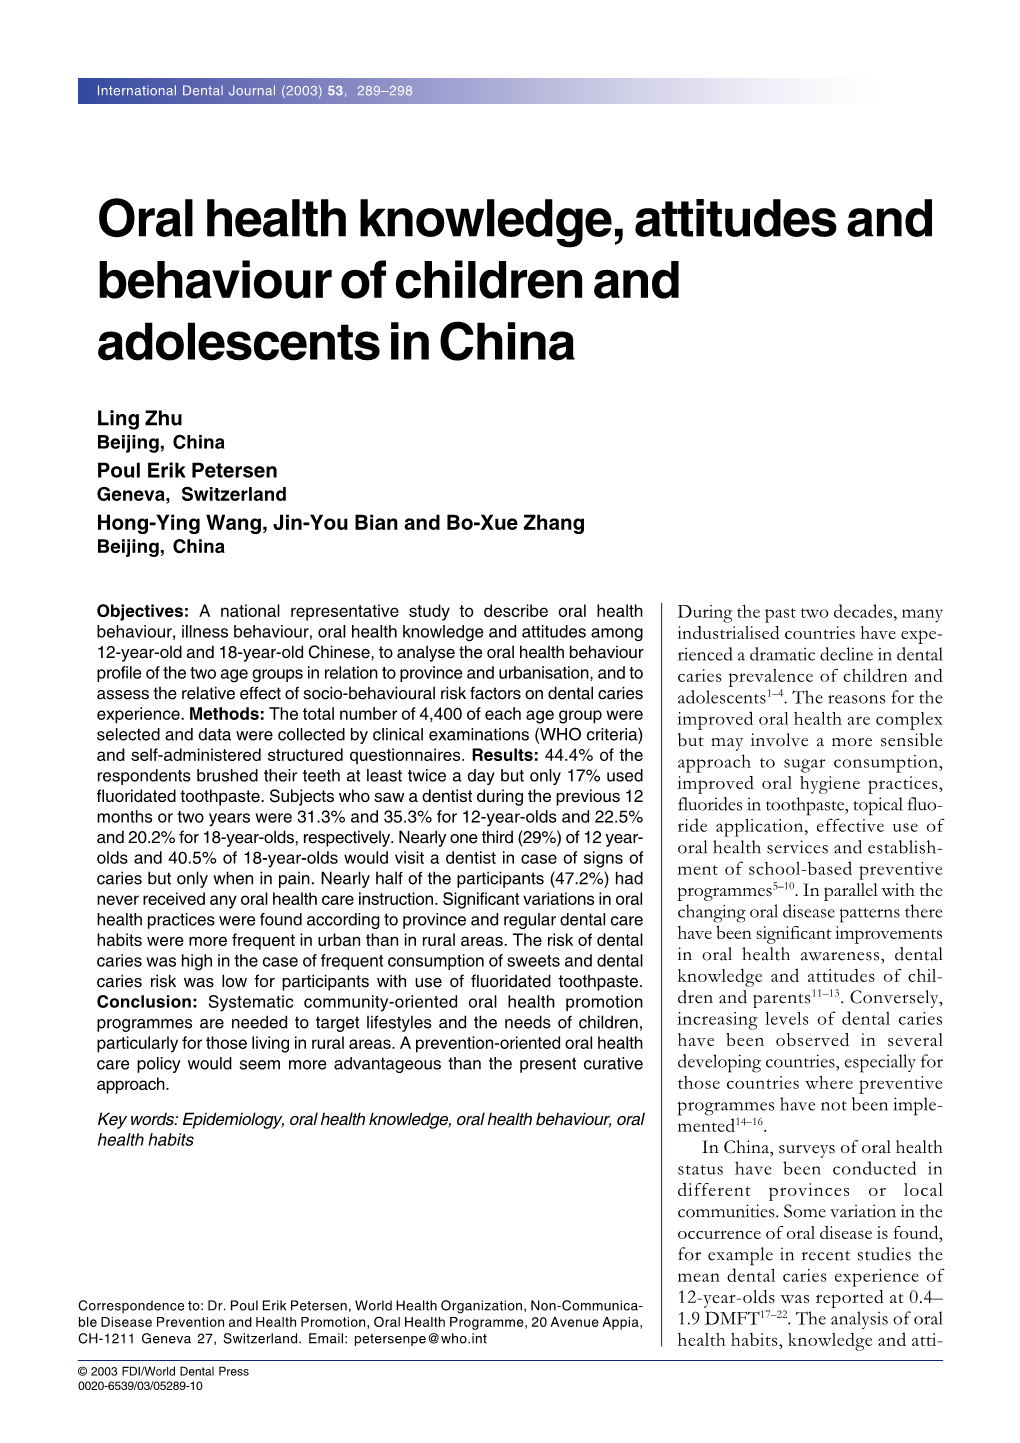 Oral Health Knowledge, Attitudes and Behaviour of Children and Adolescents in China